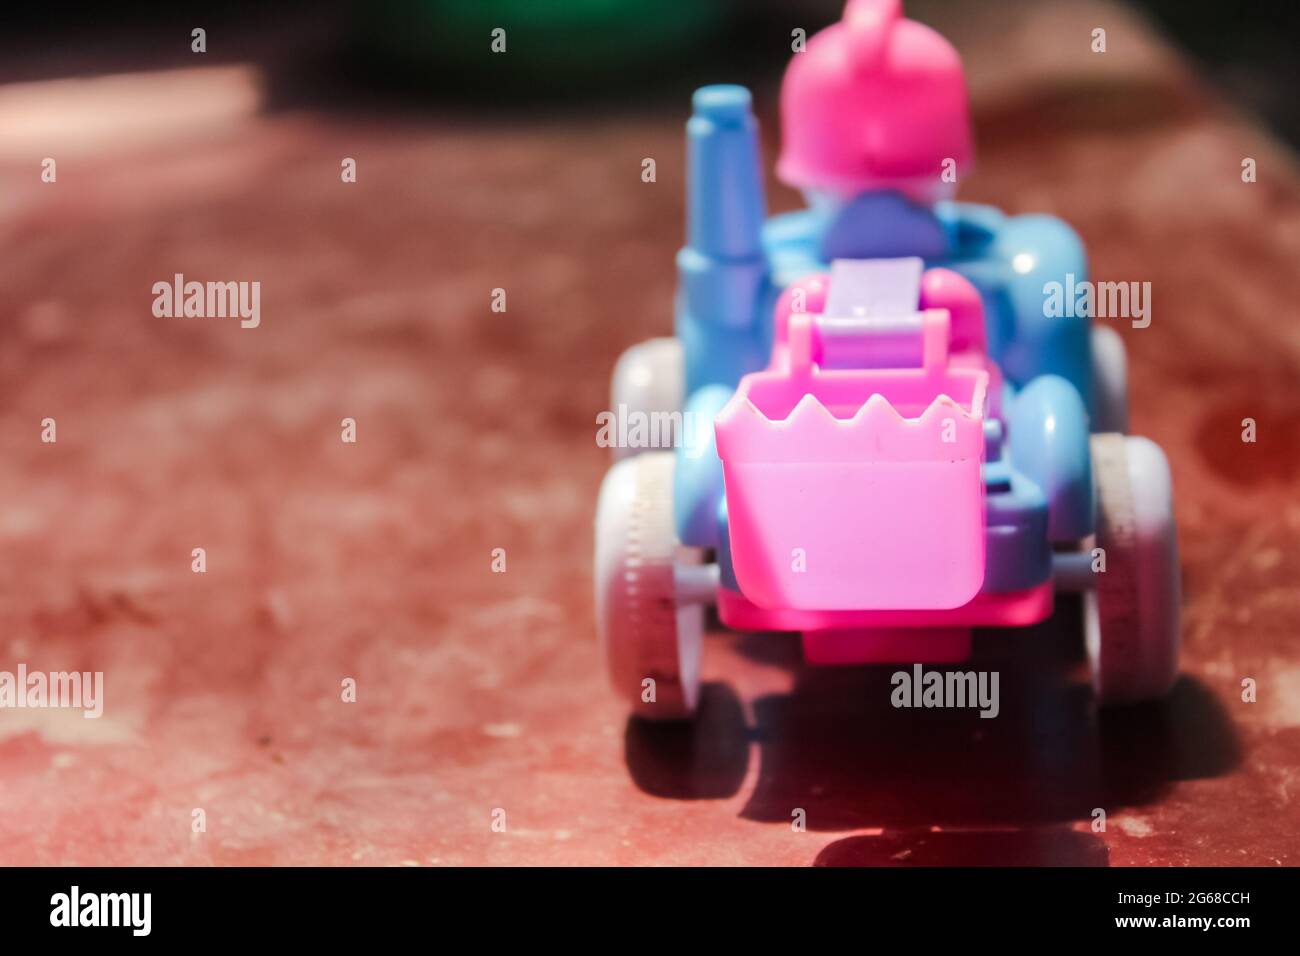 Gaming toys for baby, Stock Photo